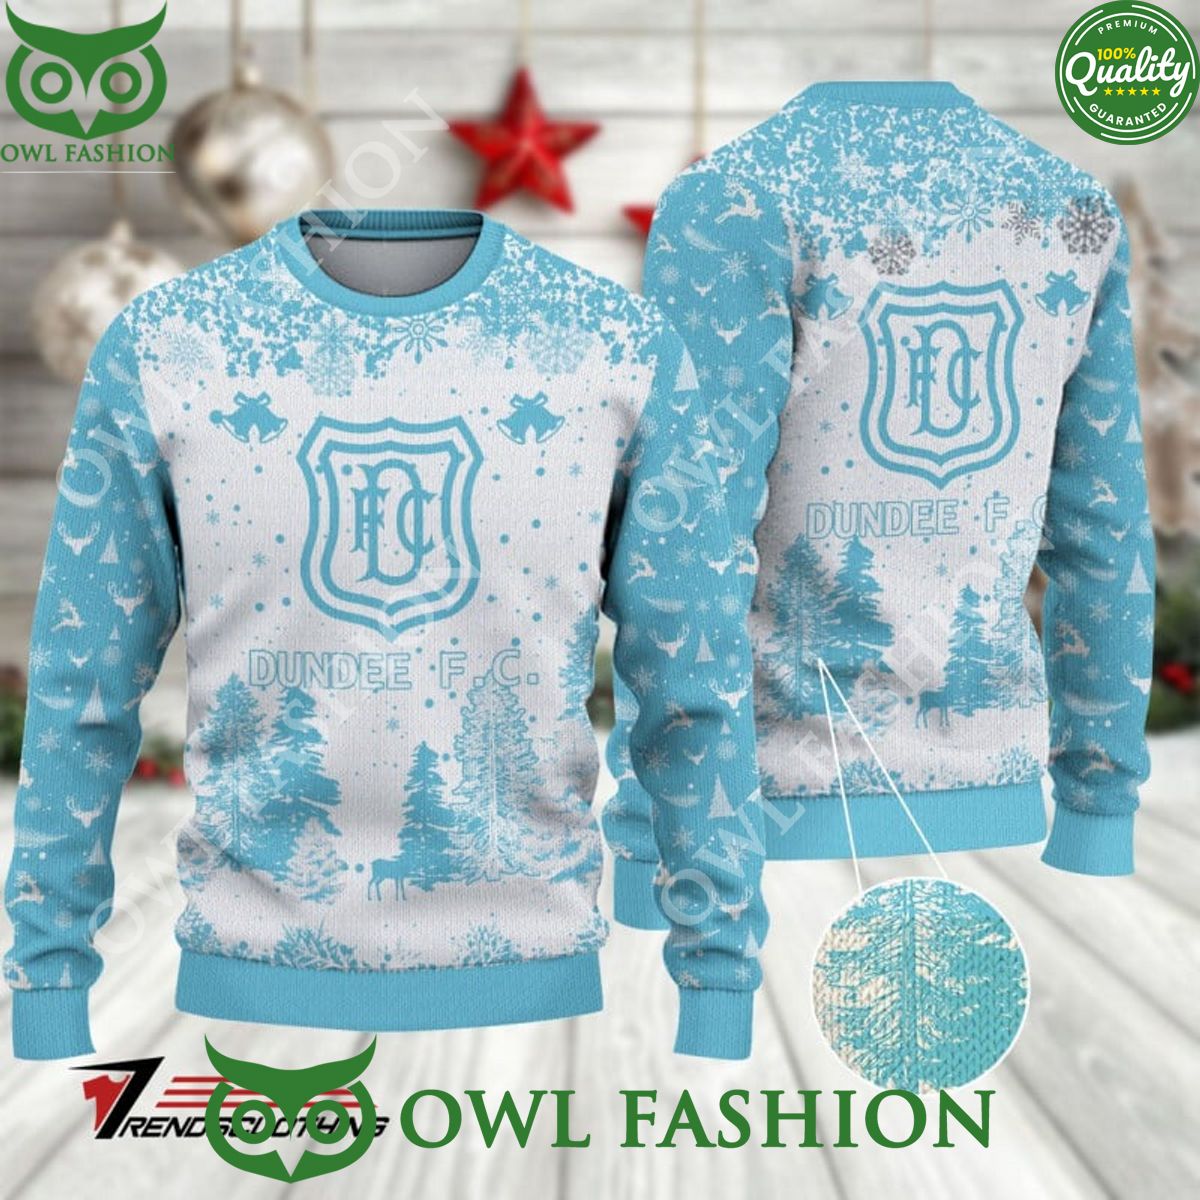 Dundee F.C. SPFL Scottish Snow Fall Pine Ugly sweater jumper Loving click